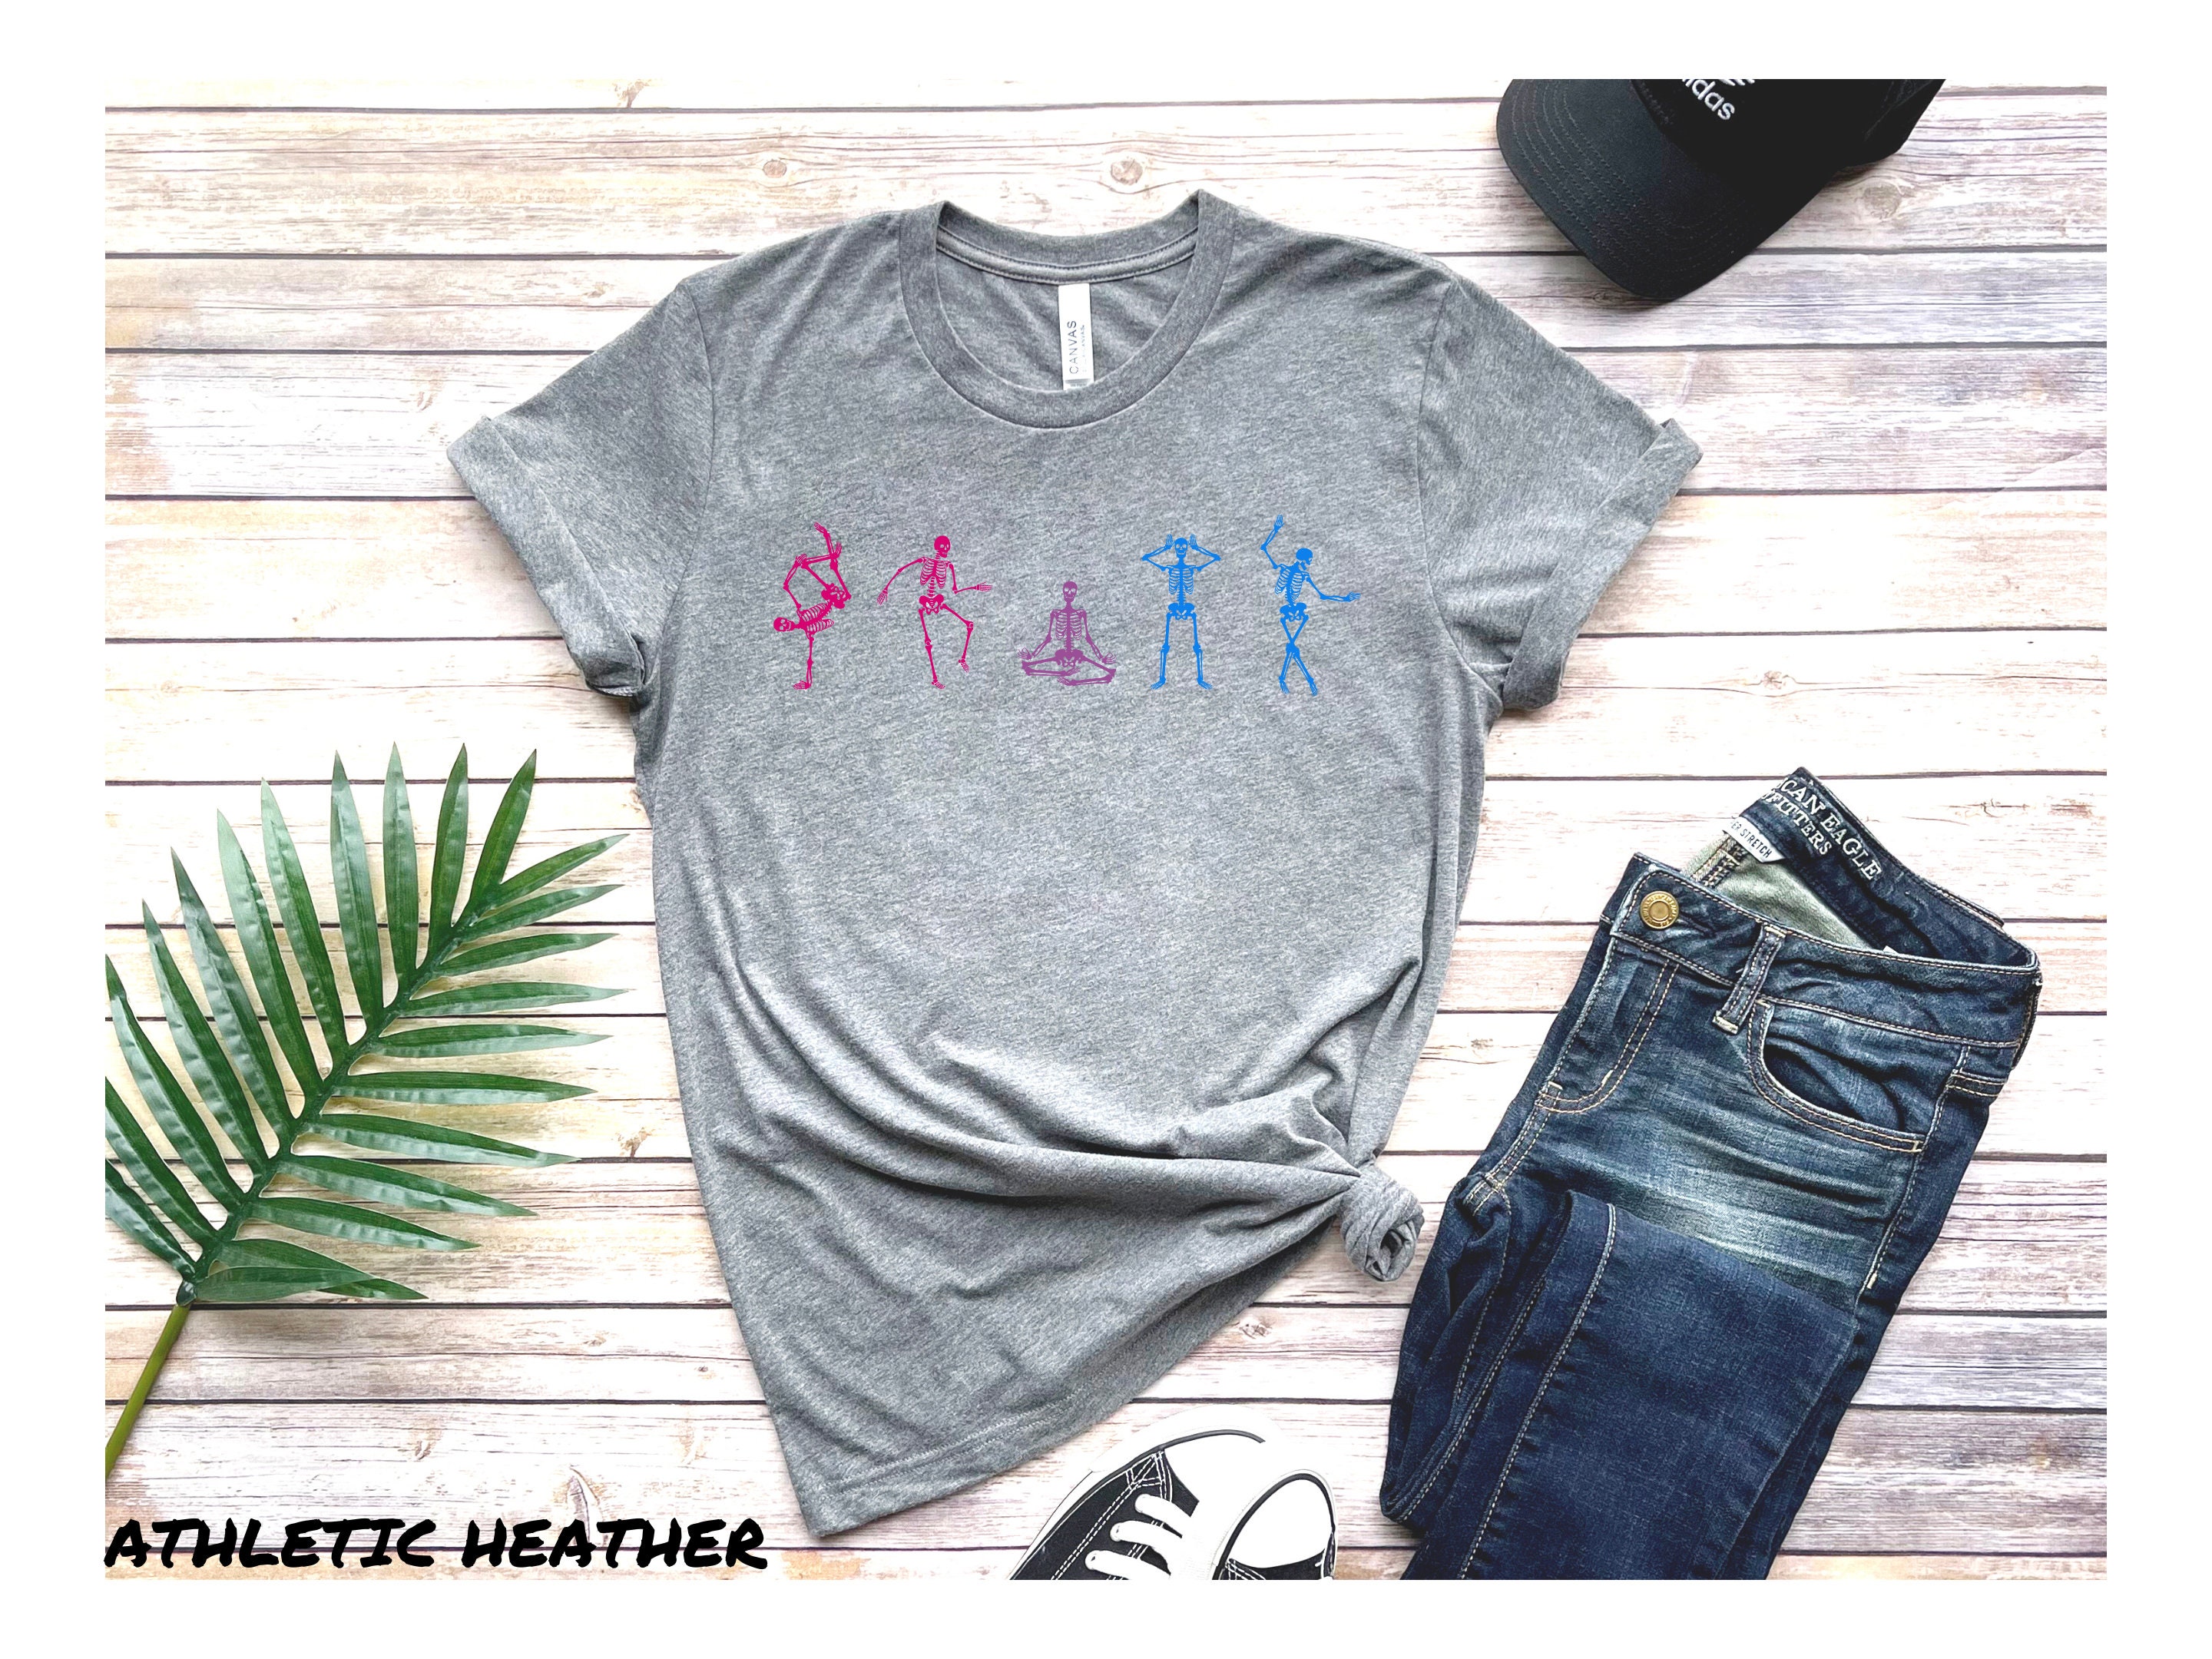 Discover Bisexual Halloween T Shirt, Bi Flag Skeletons Tshirt, Discreet Bisexuality Gift, Subtle LGBT Pride Month March, Autumn LGBTQ Parade Present